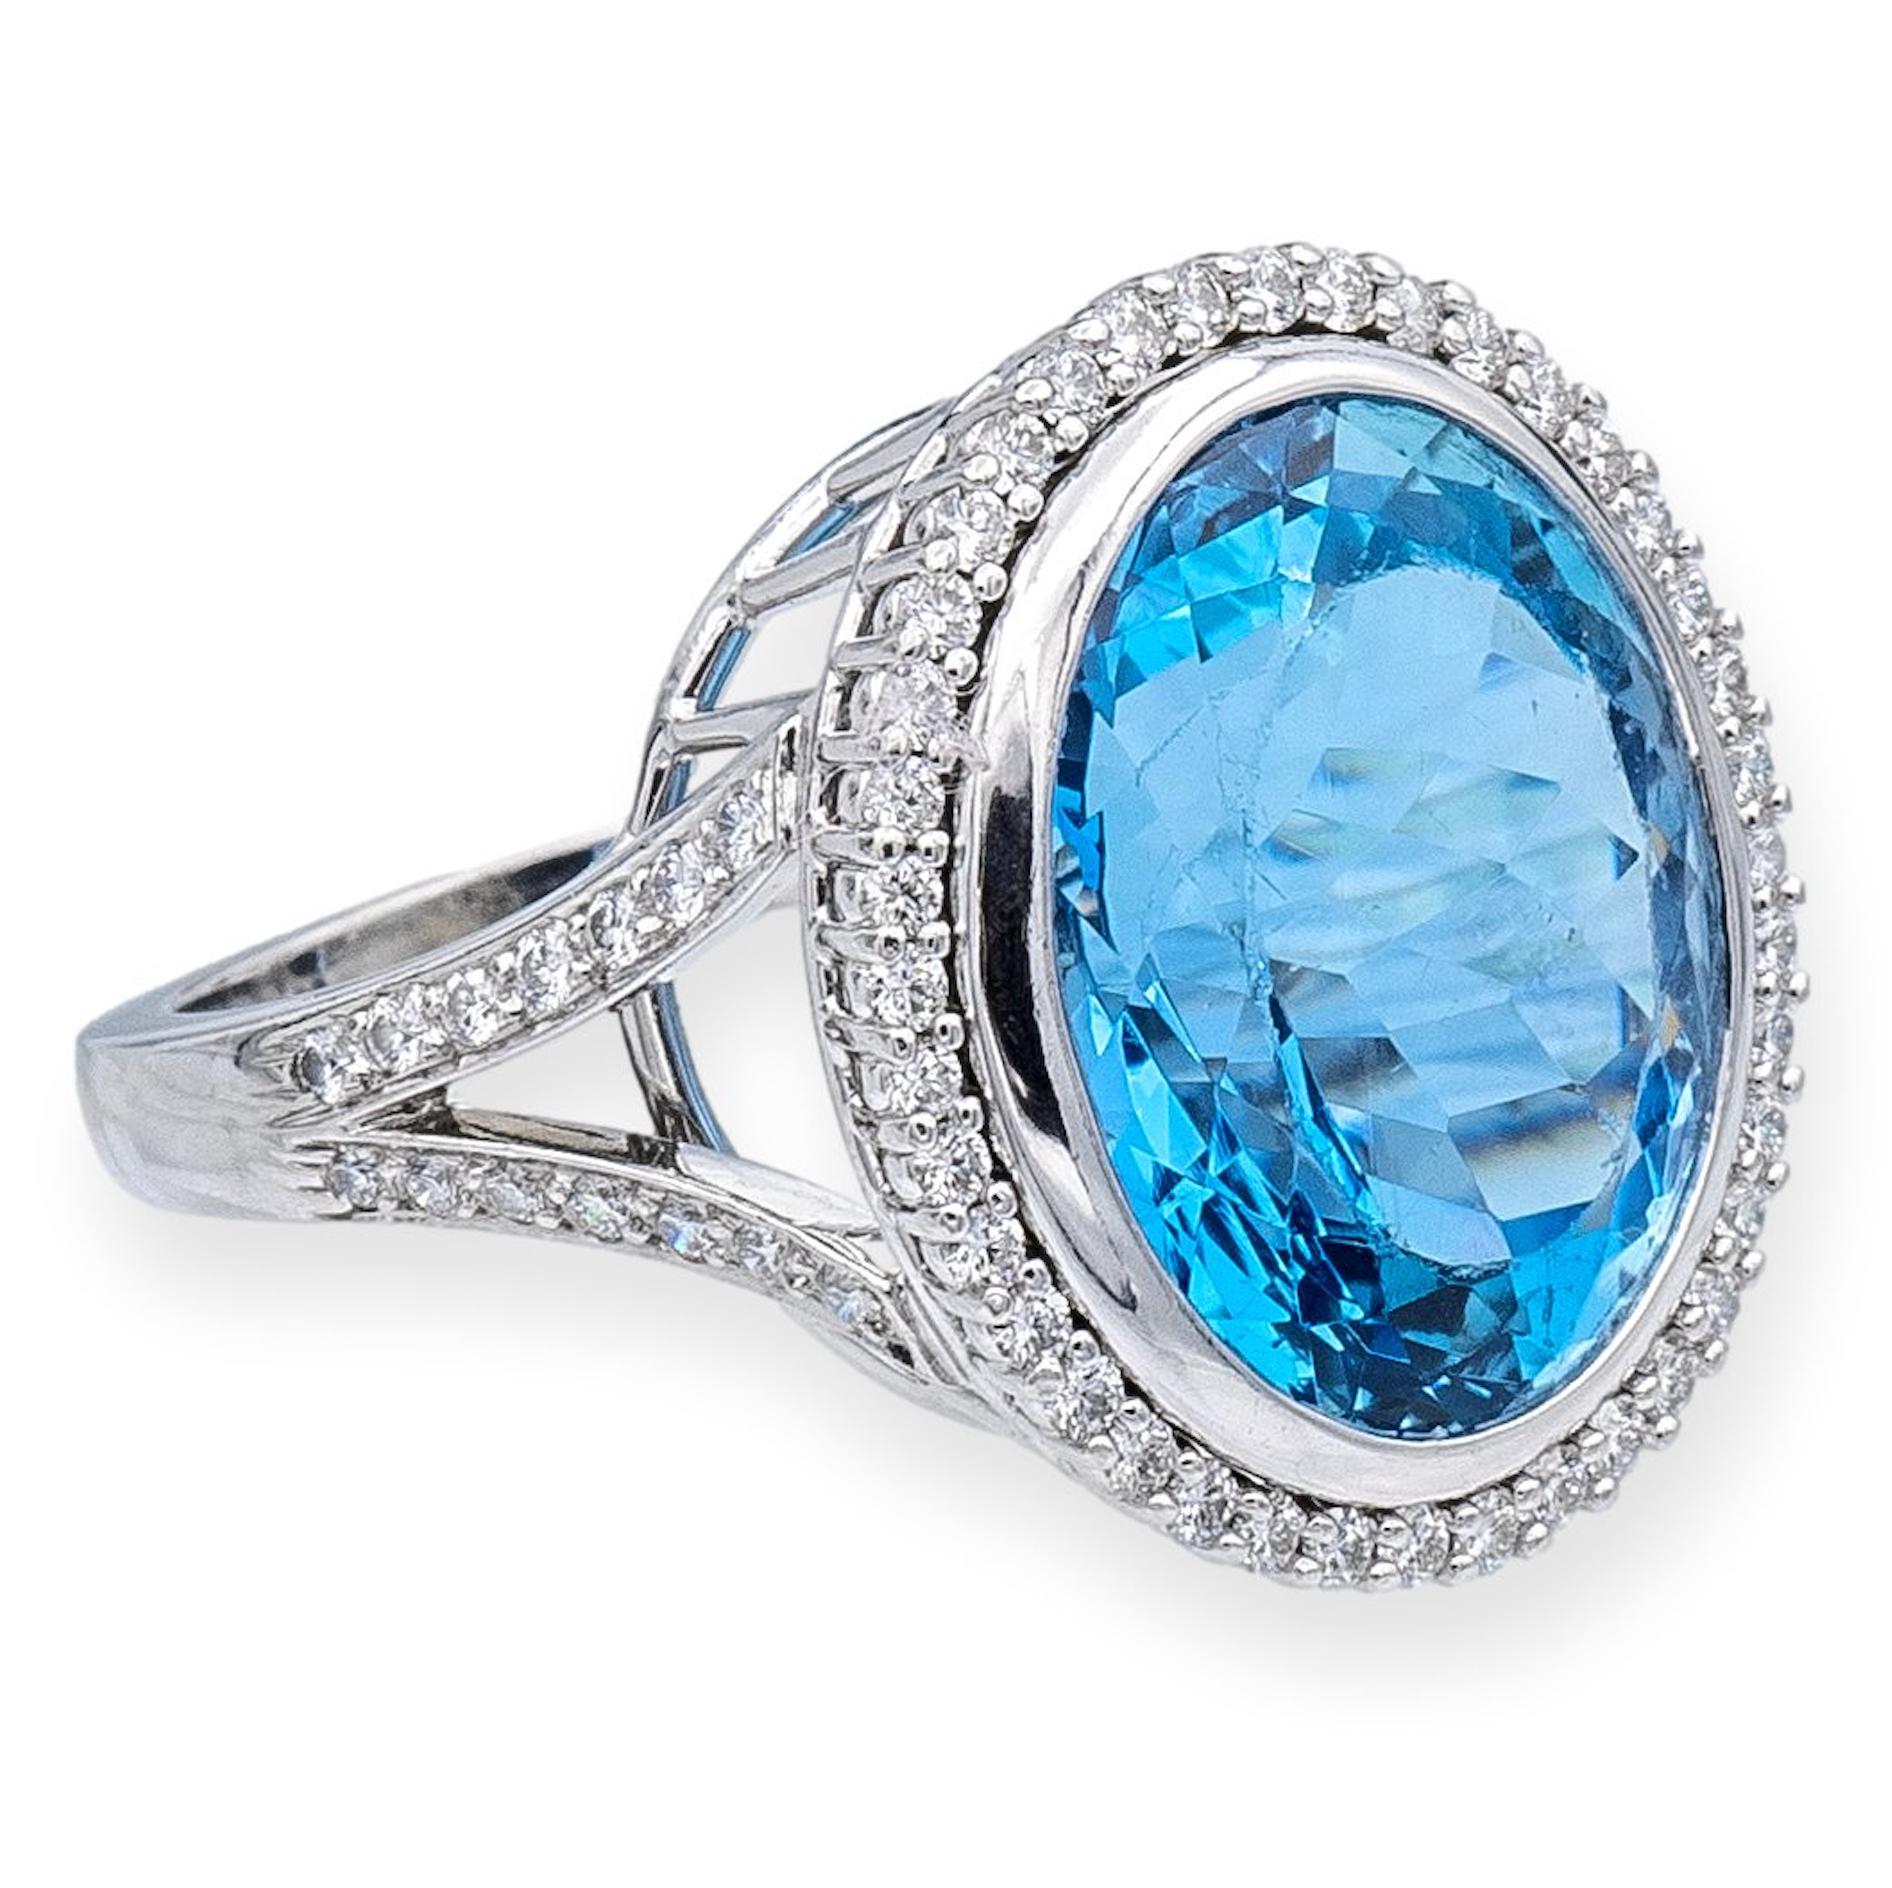 This Tiffany & Co. cocktail ring finely crafted in platinum is a true masterpiece of fine craftsmanship made of exquisite platinum. The centerpiece of the ring is a magnificent oval aquamarine, set inside a bezel weighing an impressive 10.66 carats